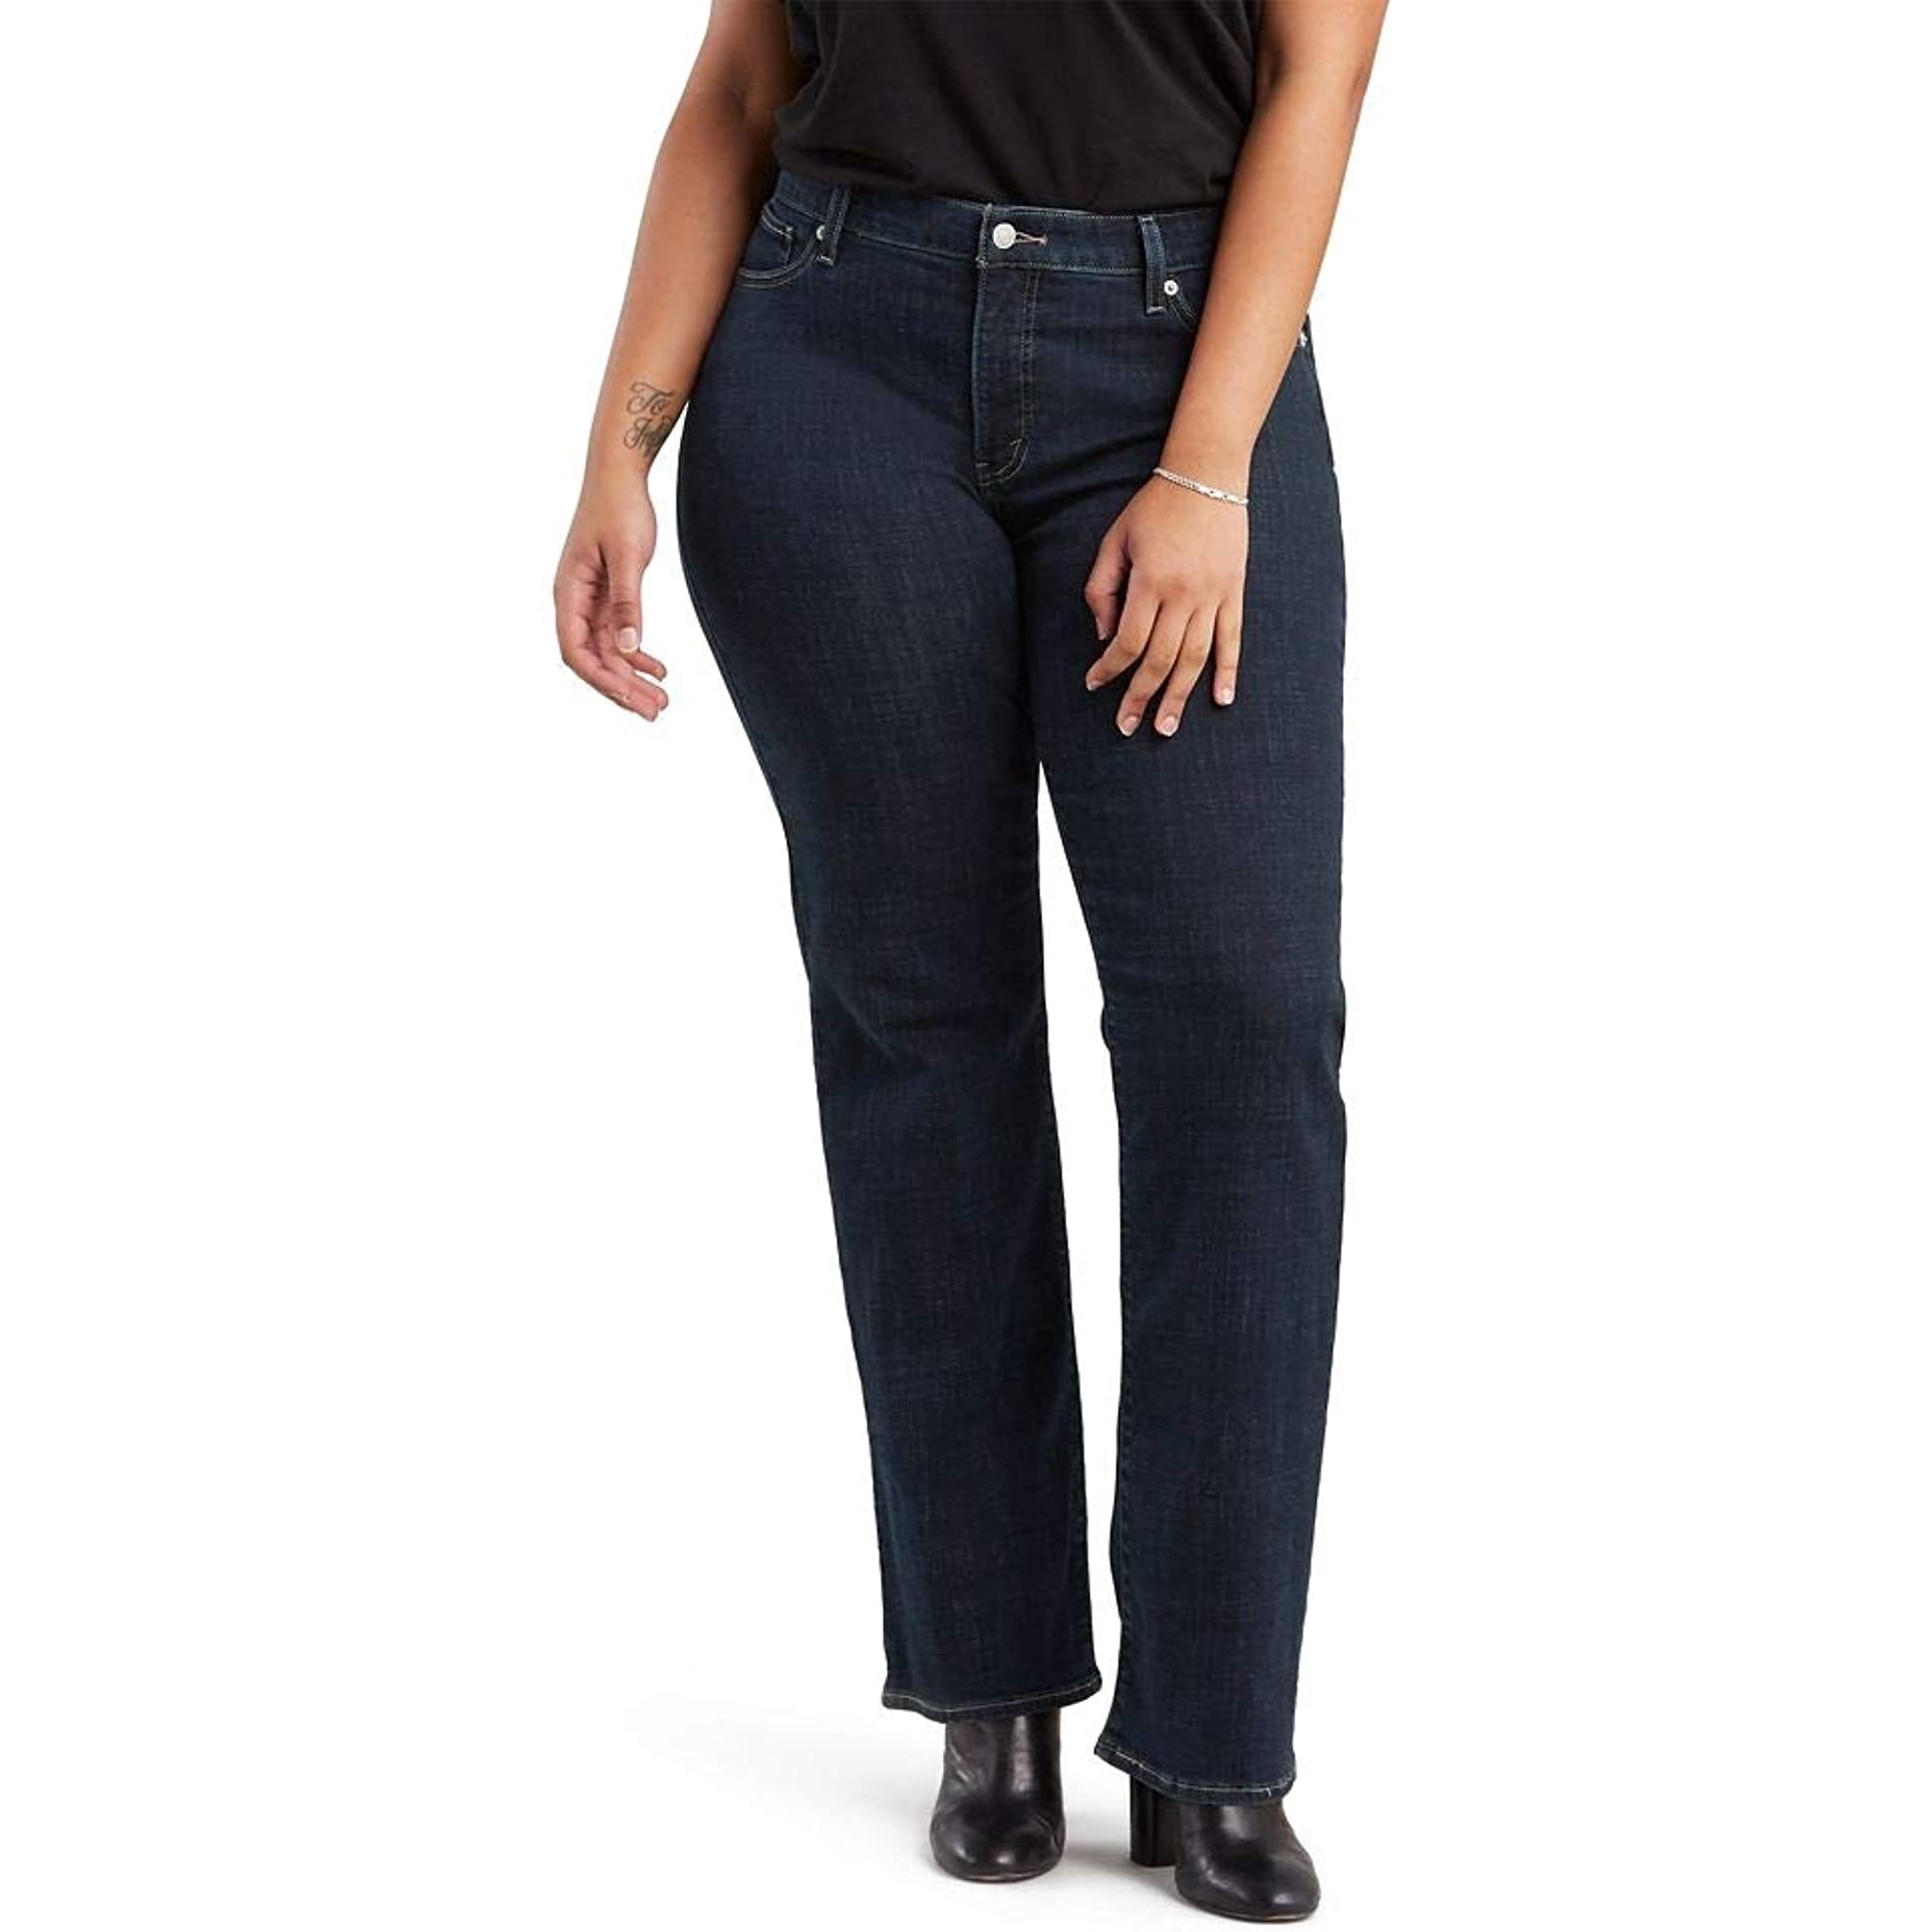 Levis Womens Classic Bootcut Jeans Standard and Plus | Walmart Canada